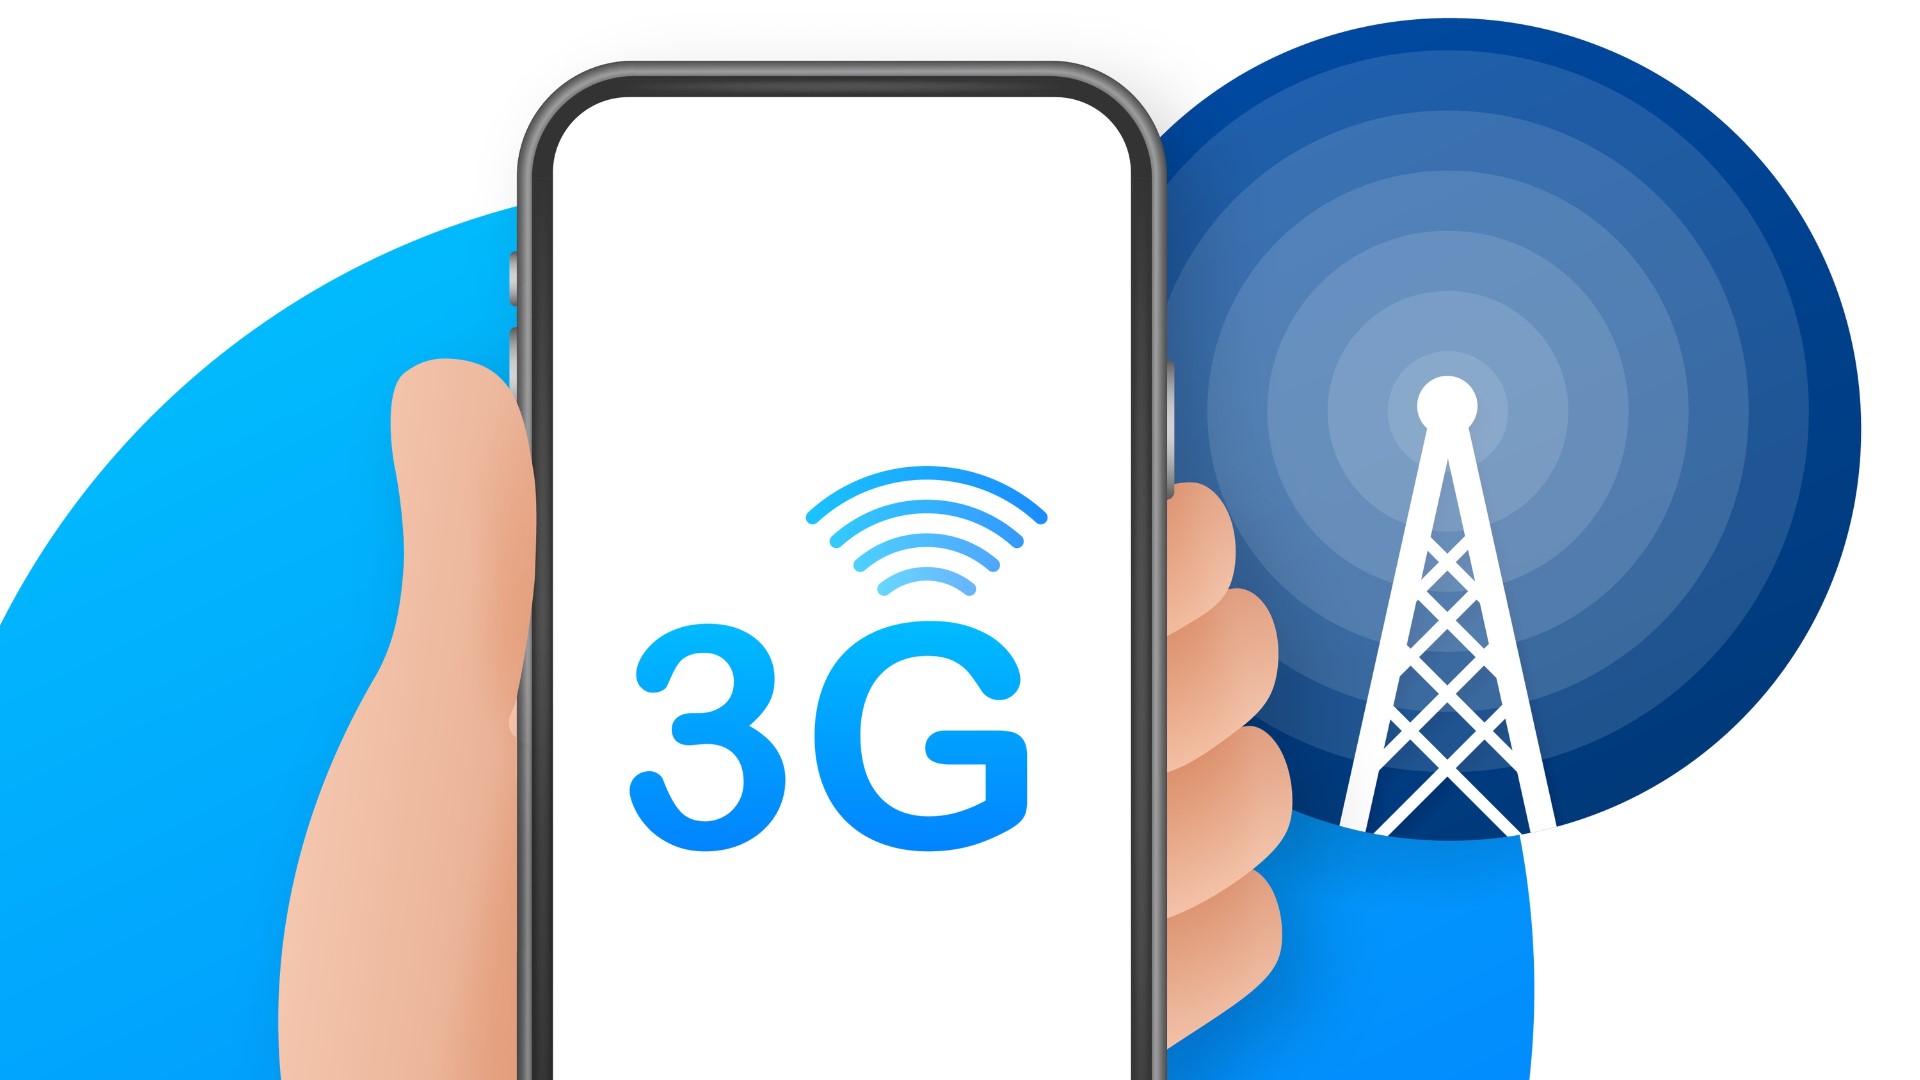 Starting February 22, AT&T is shutting down their 3G service, replacing it with 5G. We Verify what that means for consumers at home.